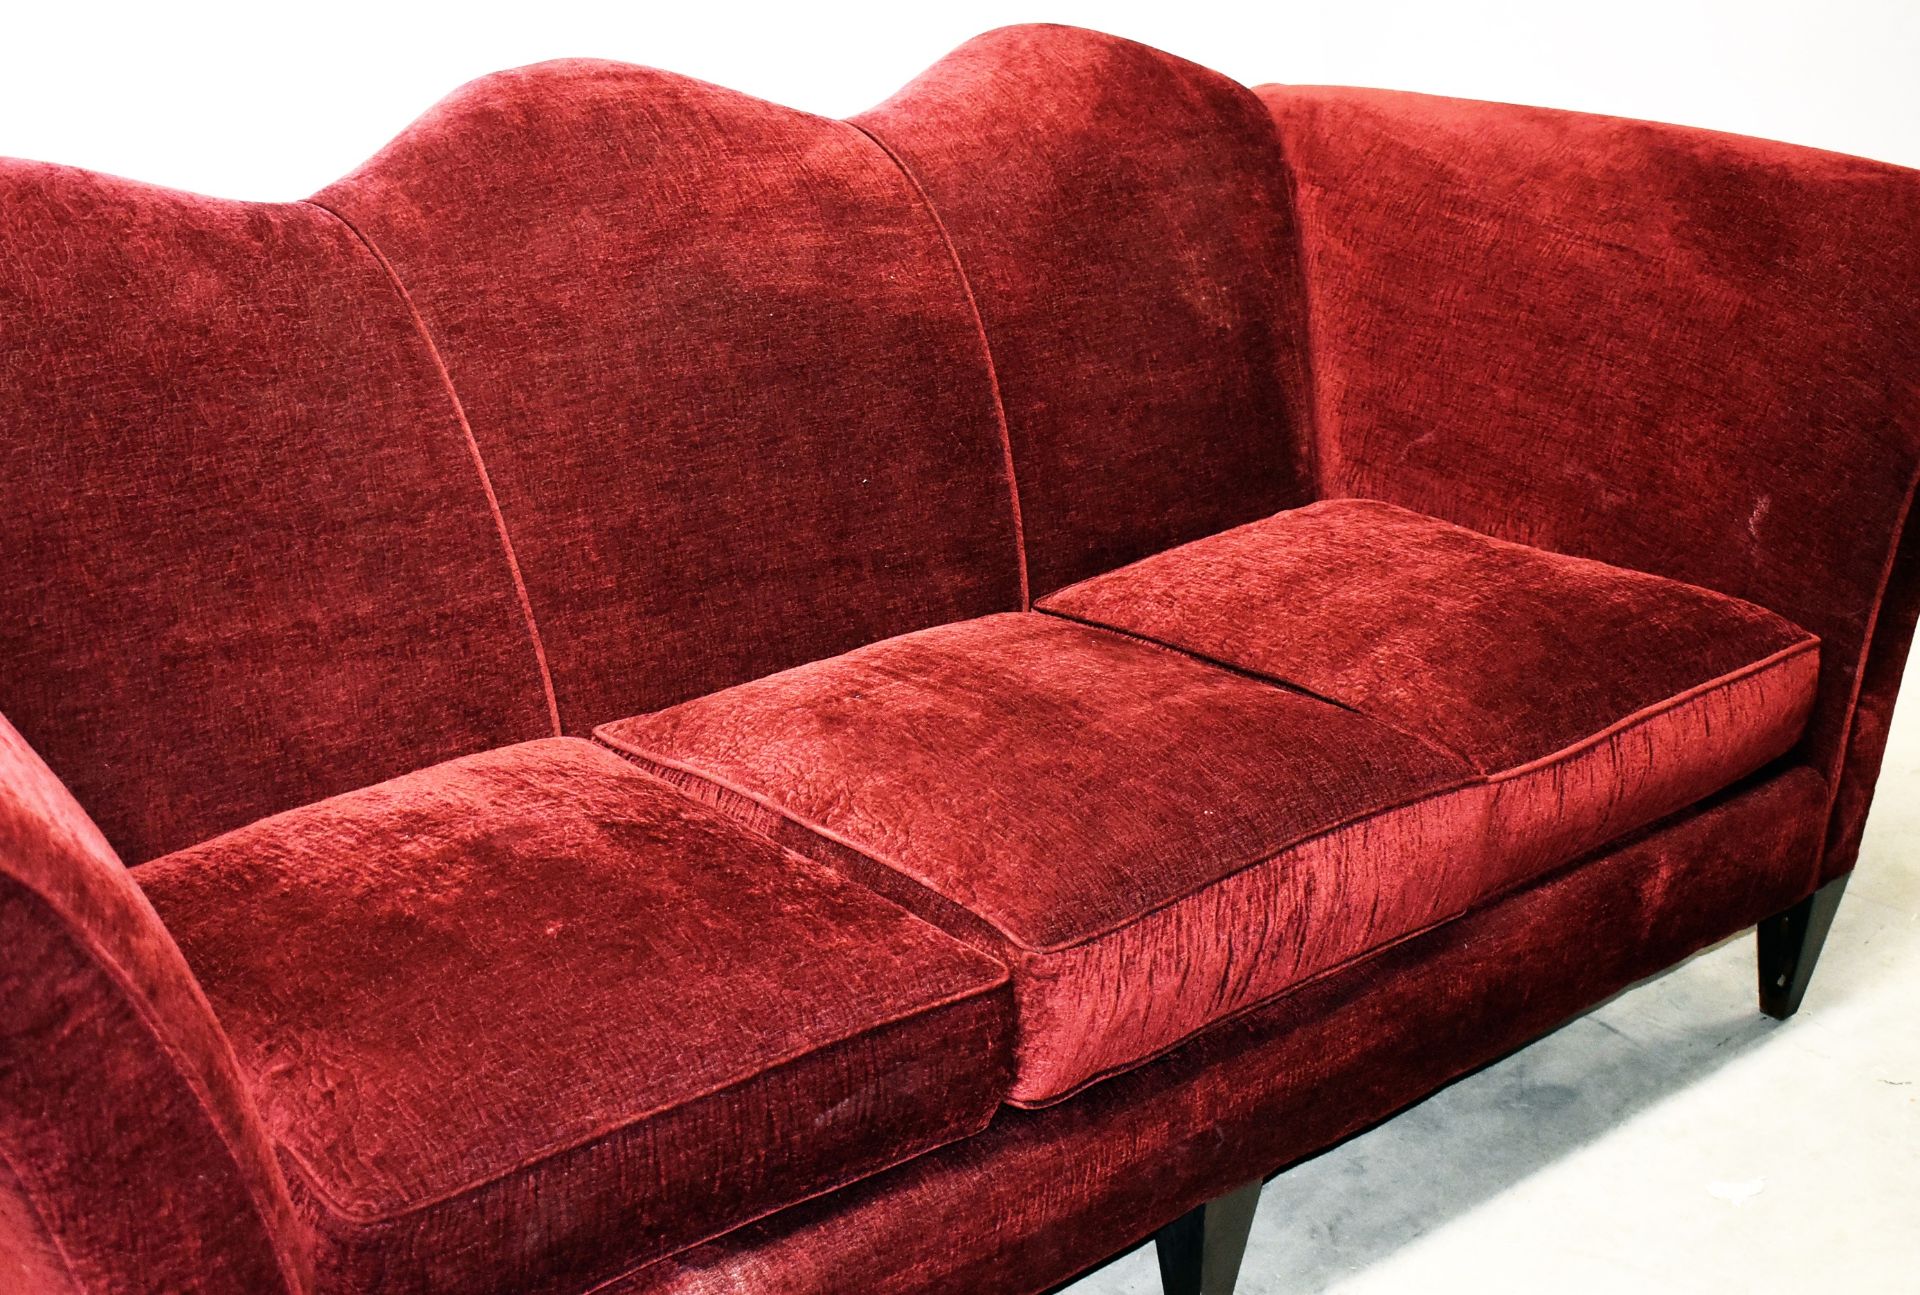 1 x DONGHIA John Hutton Red Velvet 3 Seater Sofa With Rolled Arms & Scallop Back & Wooden Legs - Image 9 of 9